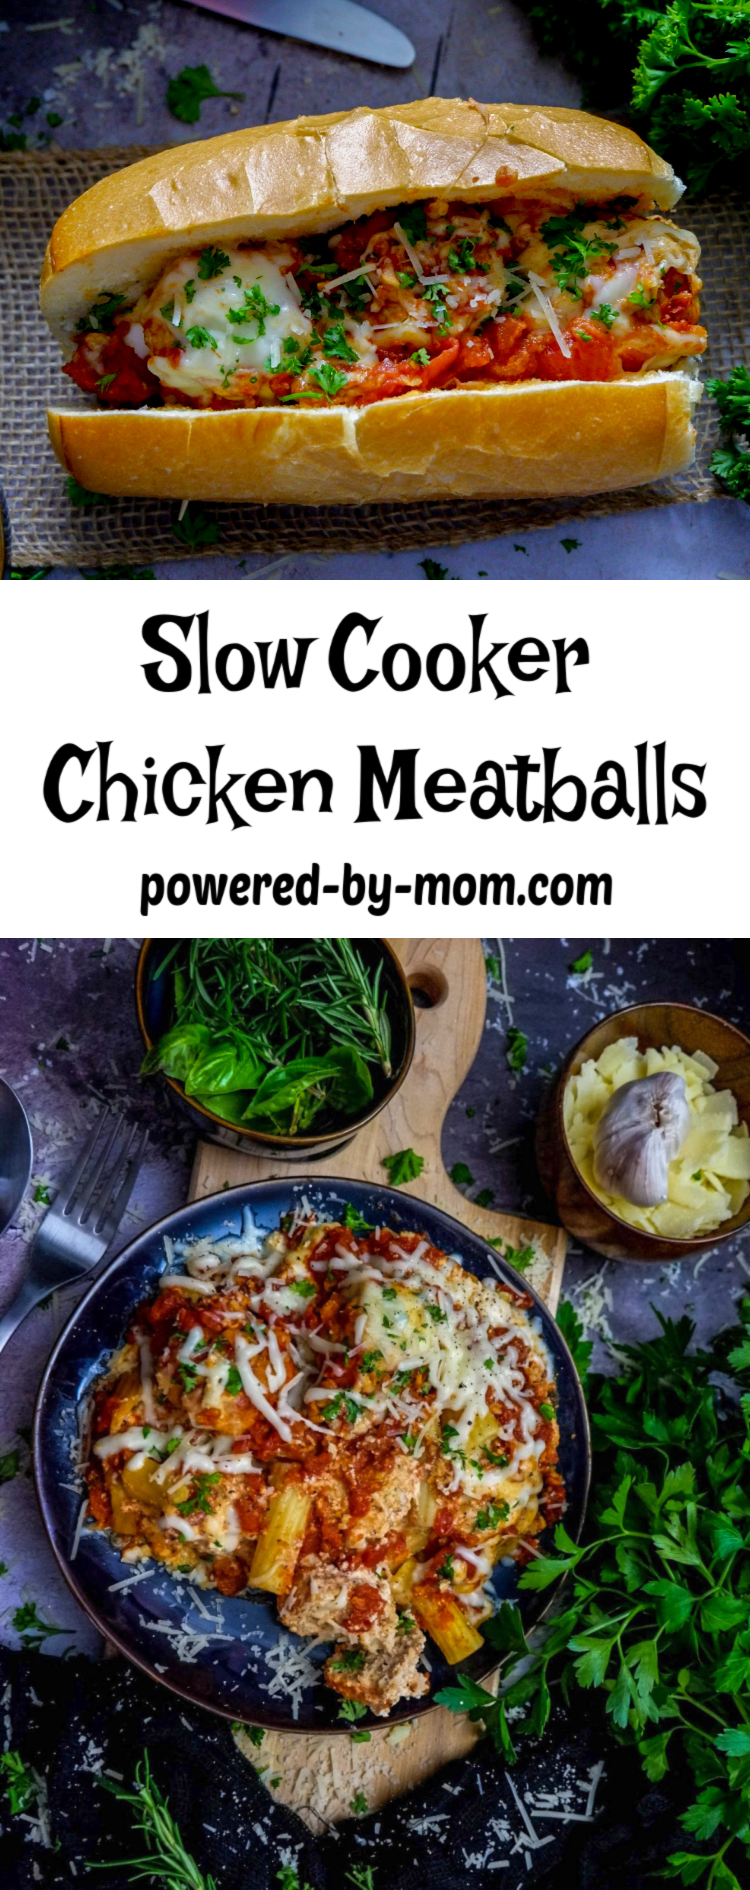 Make Slow Cooker Chicken Meatballs Recipe as a wonderful healthy and versatile option for your meal plan. Serve alone or with pasta or you can make a meatball sandwich! #chicken #chickenmeatballs #slowcooker #crockpot #crockpotchicken #crockpotmeatballs #slowcookermeatballs #slowcookerpastabake #pasta #pastabake #dinner #crockpotdinner #slowcookerdinner